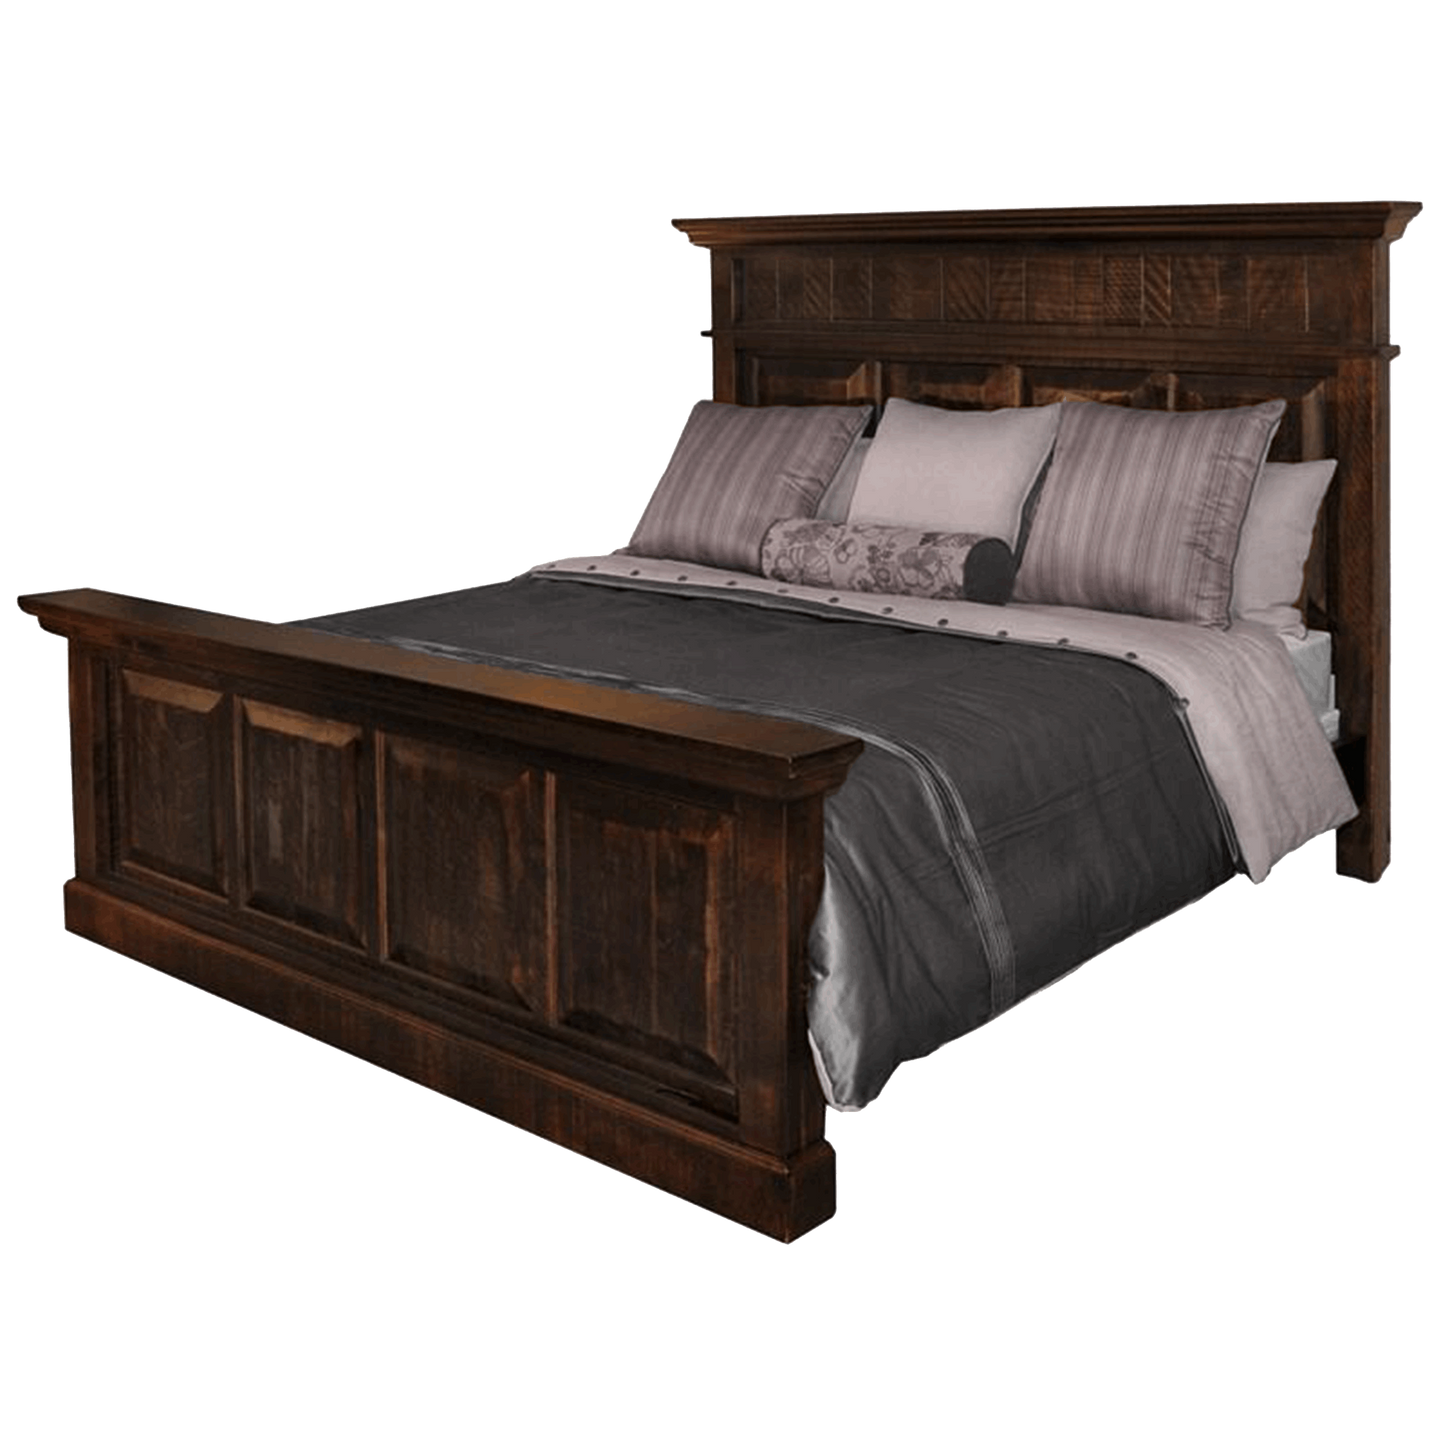 Rustic Philippe Bed